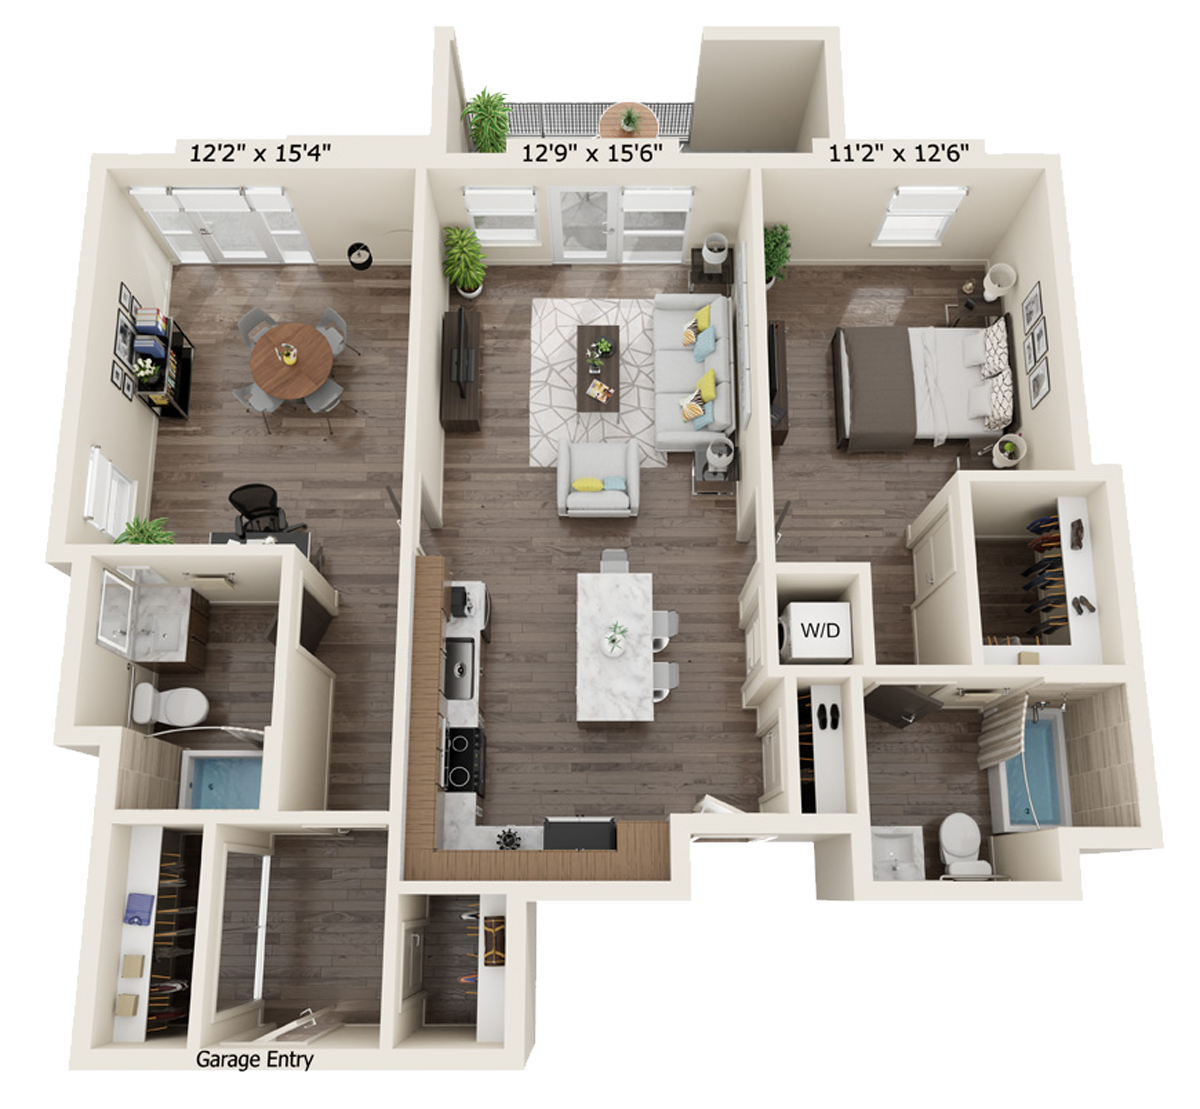 B2D floor plan with 2 bed, 2 bath and is 1115 square feet